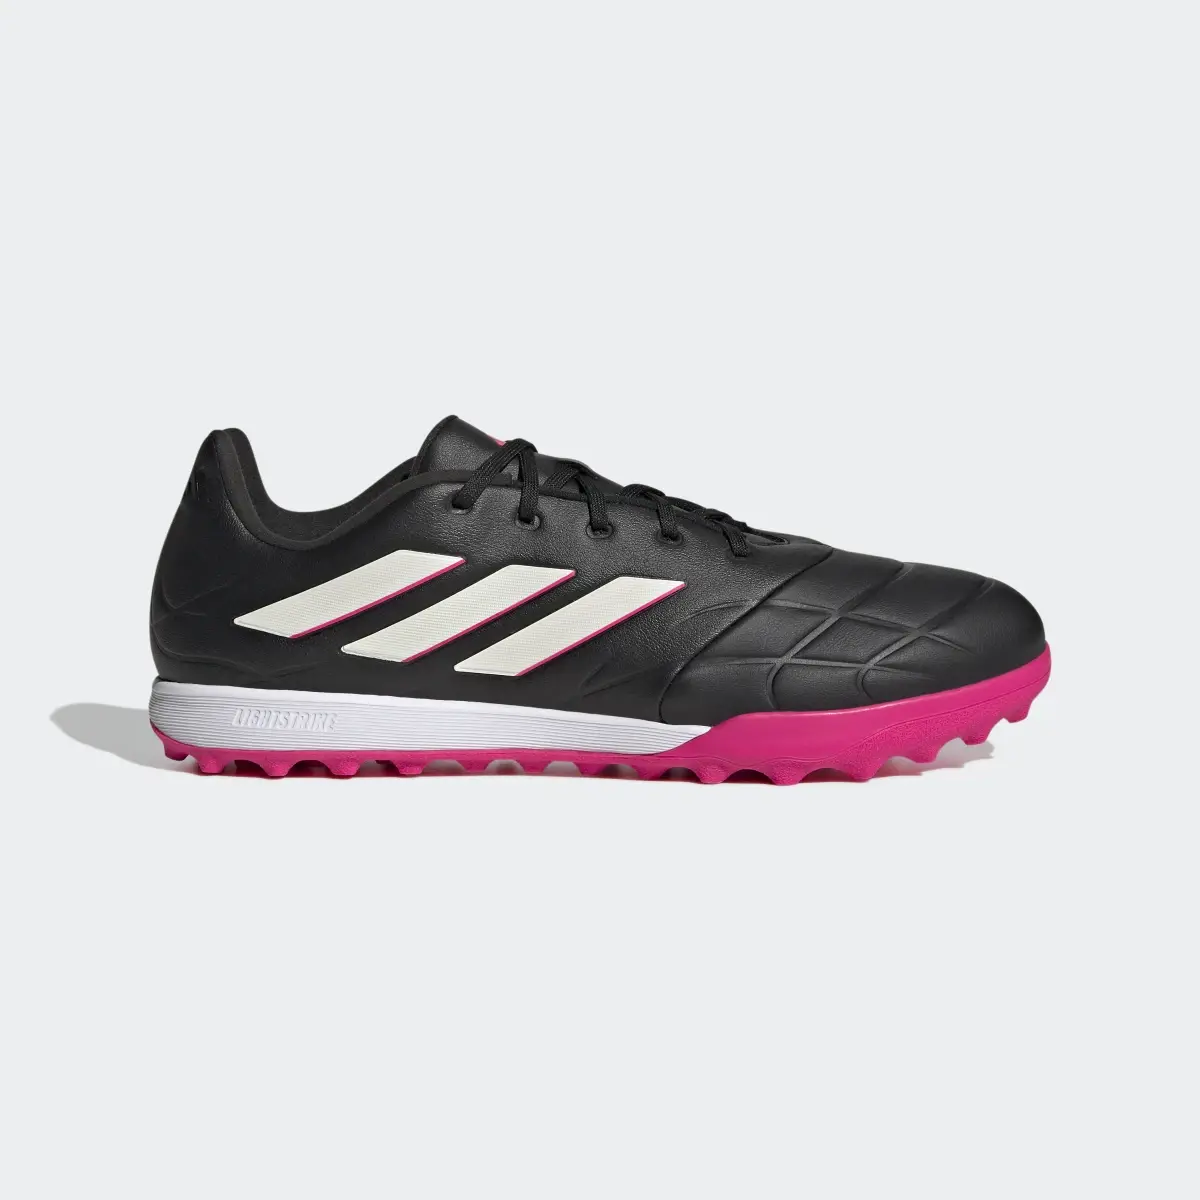 Adidas Copa Pure.3 Turf Boots. 2